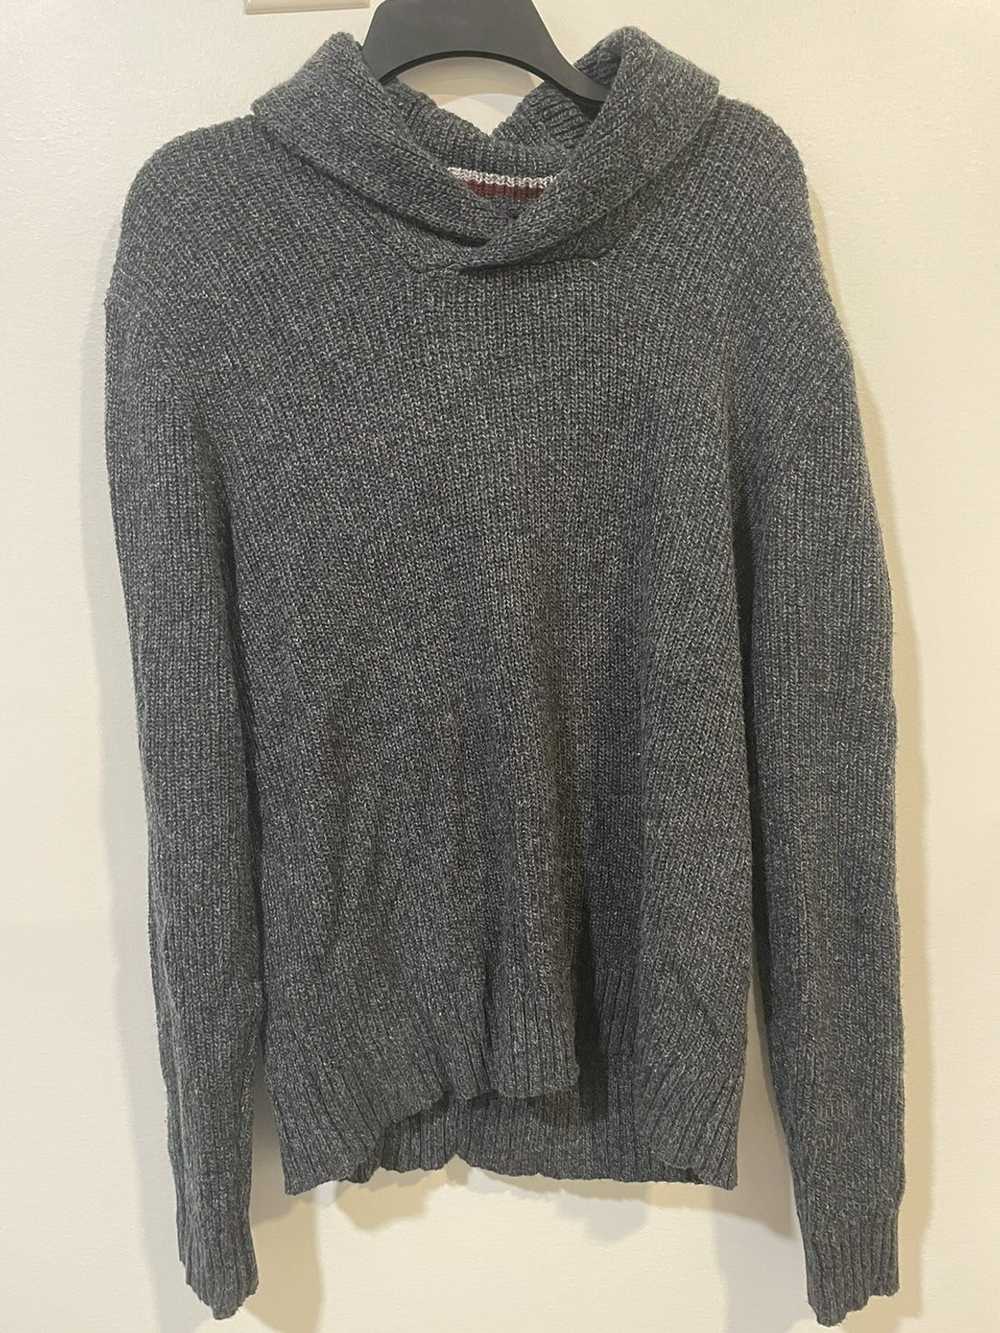 American Eagle Outfitters AE Big Neck Knit Sweater - image 1